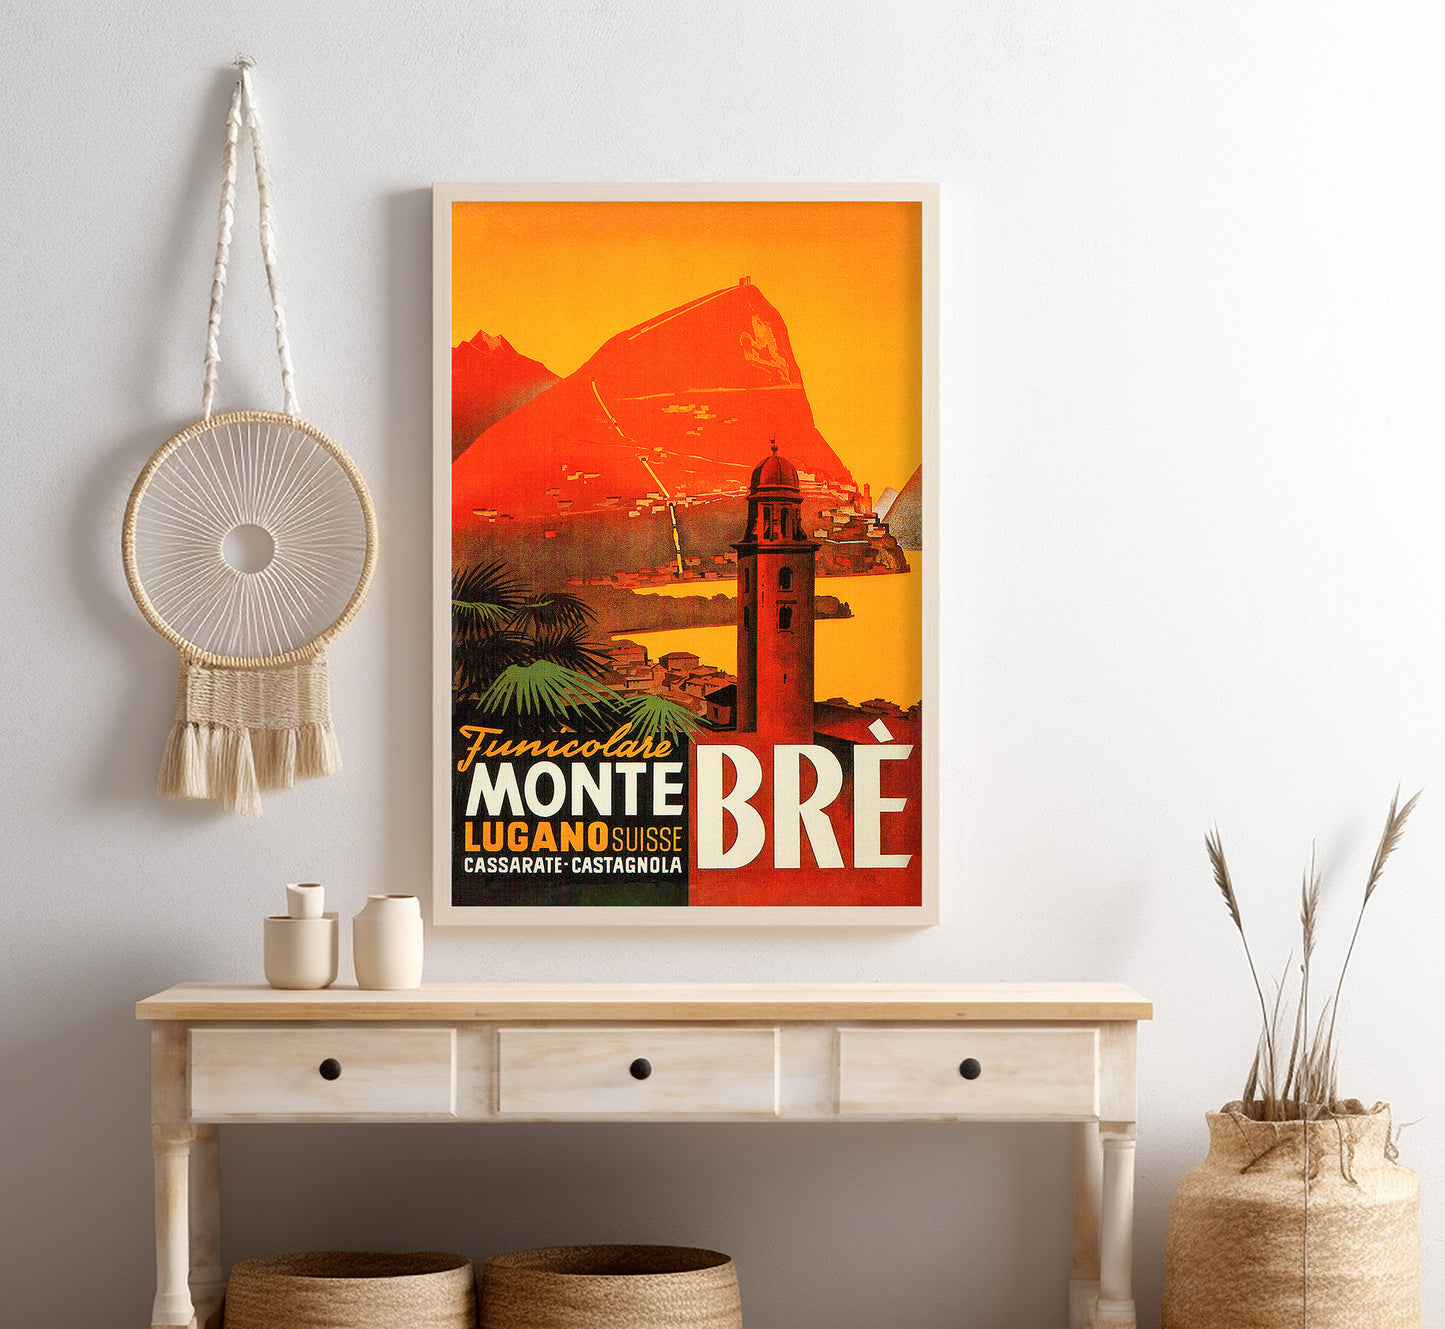 Funicular Monte Bre Lugano lake, Switzerland vintage poster by unknown author, c. 1930s.